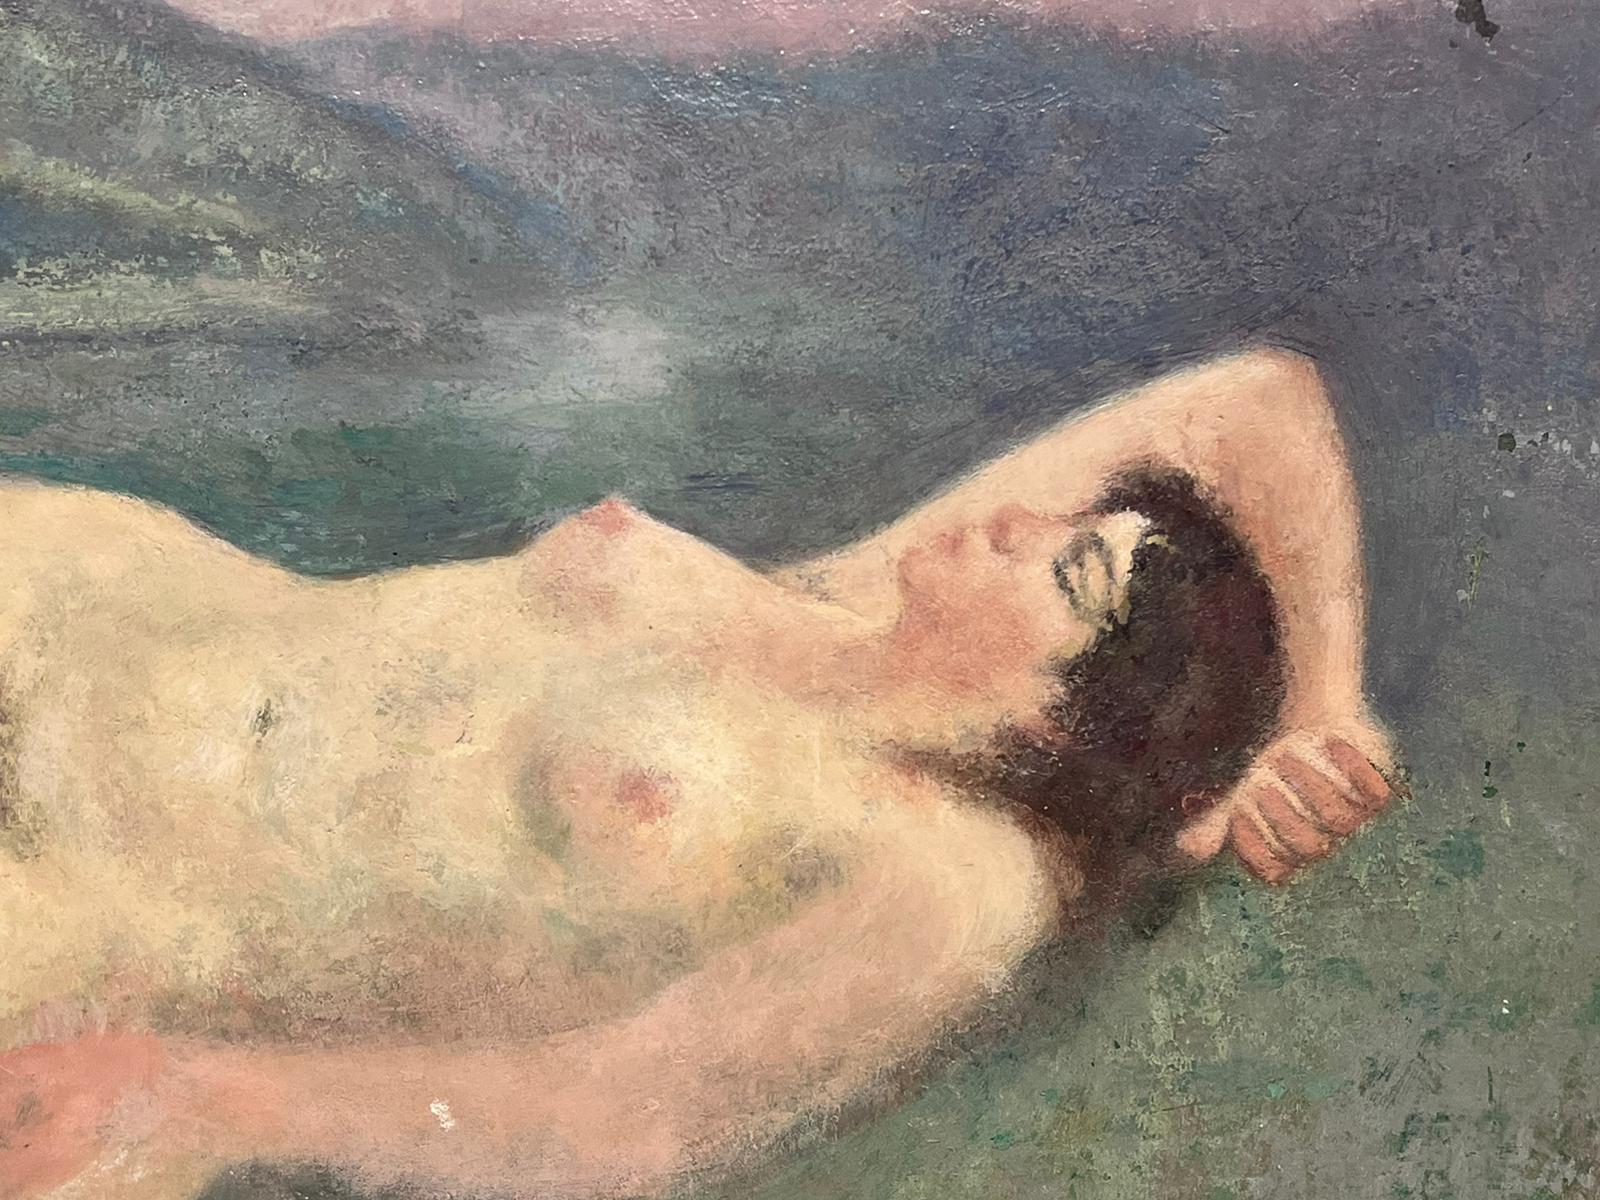 The Artists Model
French Post-Impressionist artist, circa 1930's
oil on board, unframed 
board: 23.5 x 34.5 inches
provenance: private collection, France
condition: good and sound condition, a few scuffs and paint loss scratches.